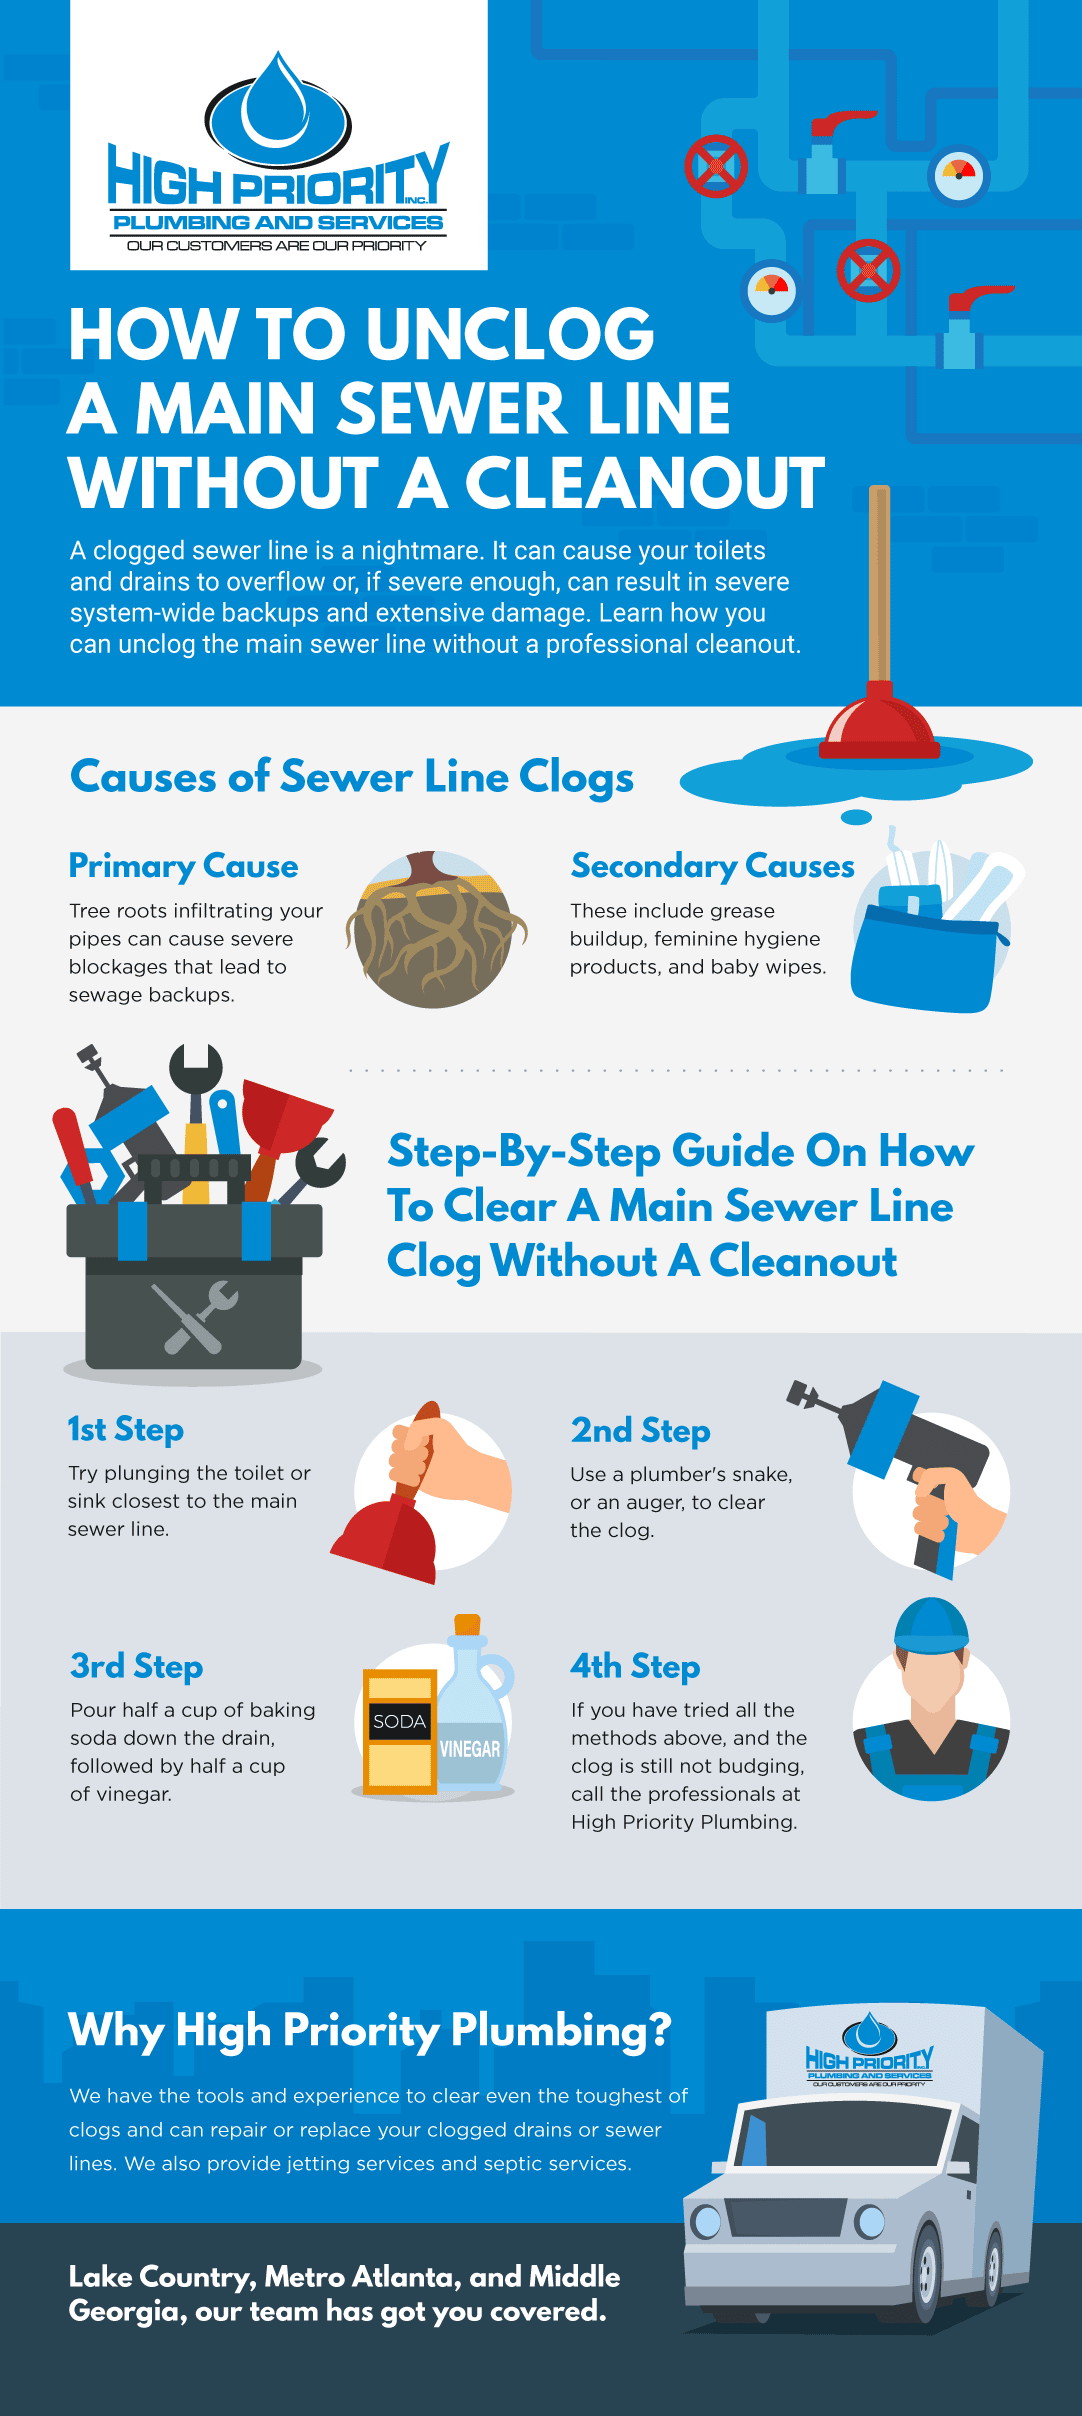 How to Unclog a Main Sewer Line Without a Cleanout